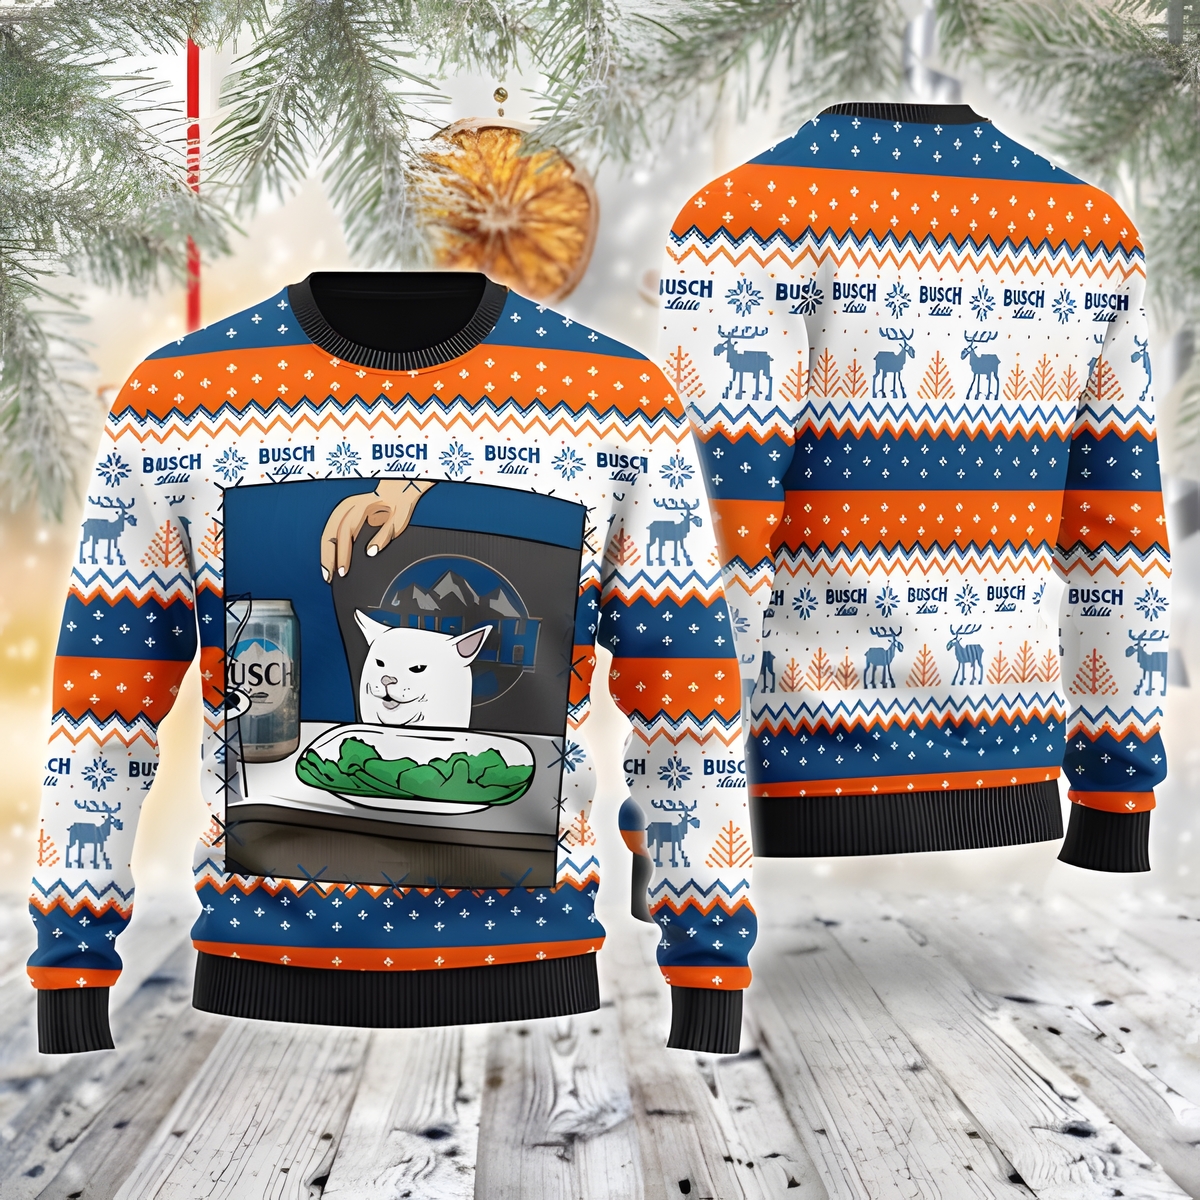 Busch Latte Ugly Christmas Sweater Funny Smudge The Cat Loves Busch Gift For Beer Lovers